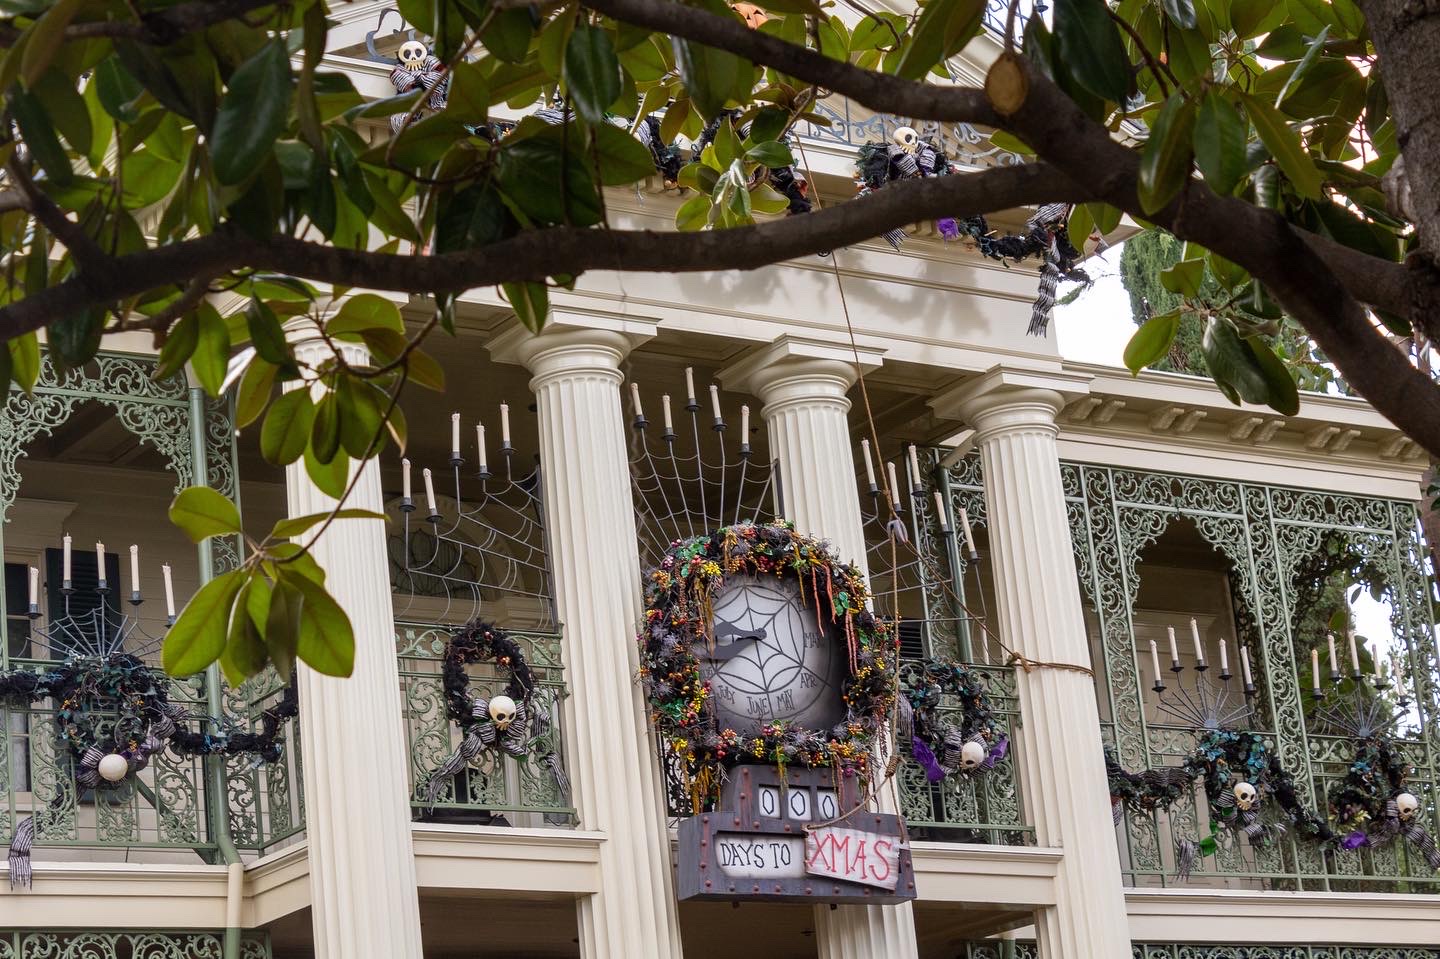 A section of the upper outside level of the Haunted Mansion, a white New Orleans-style building with pale green decorative grating, with a large holiday wreath and a sign reading O days until Xmas